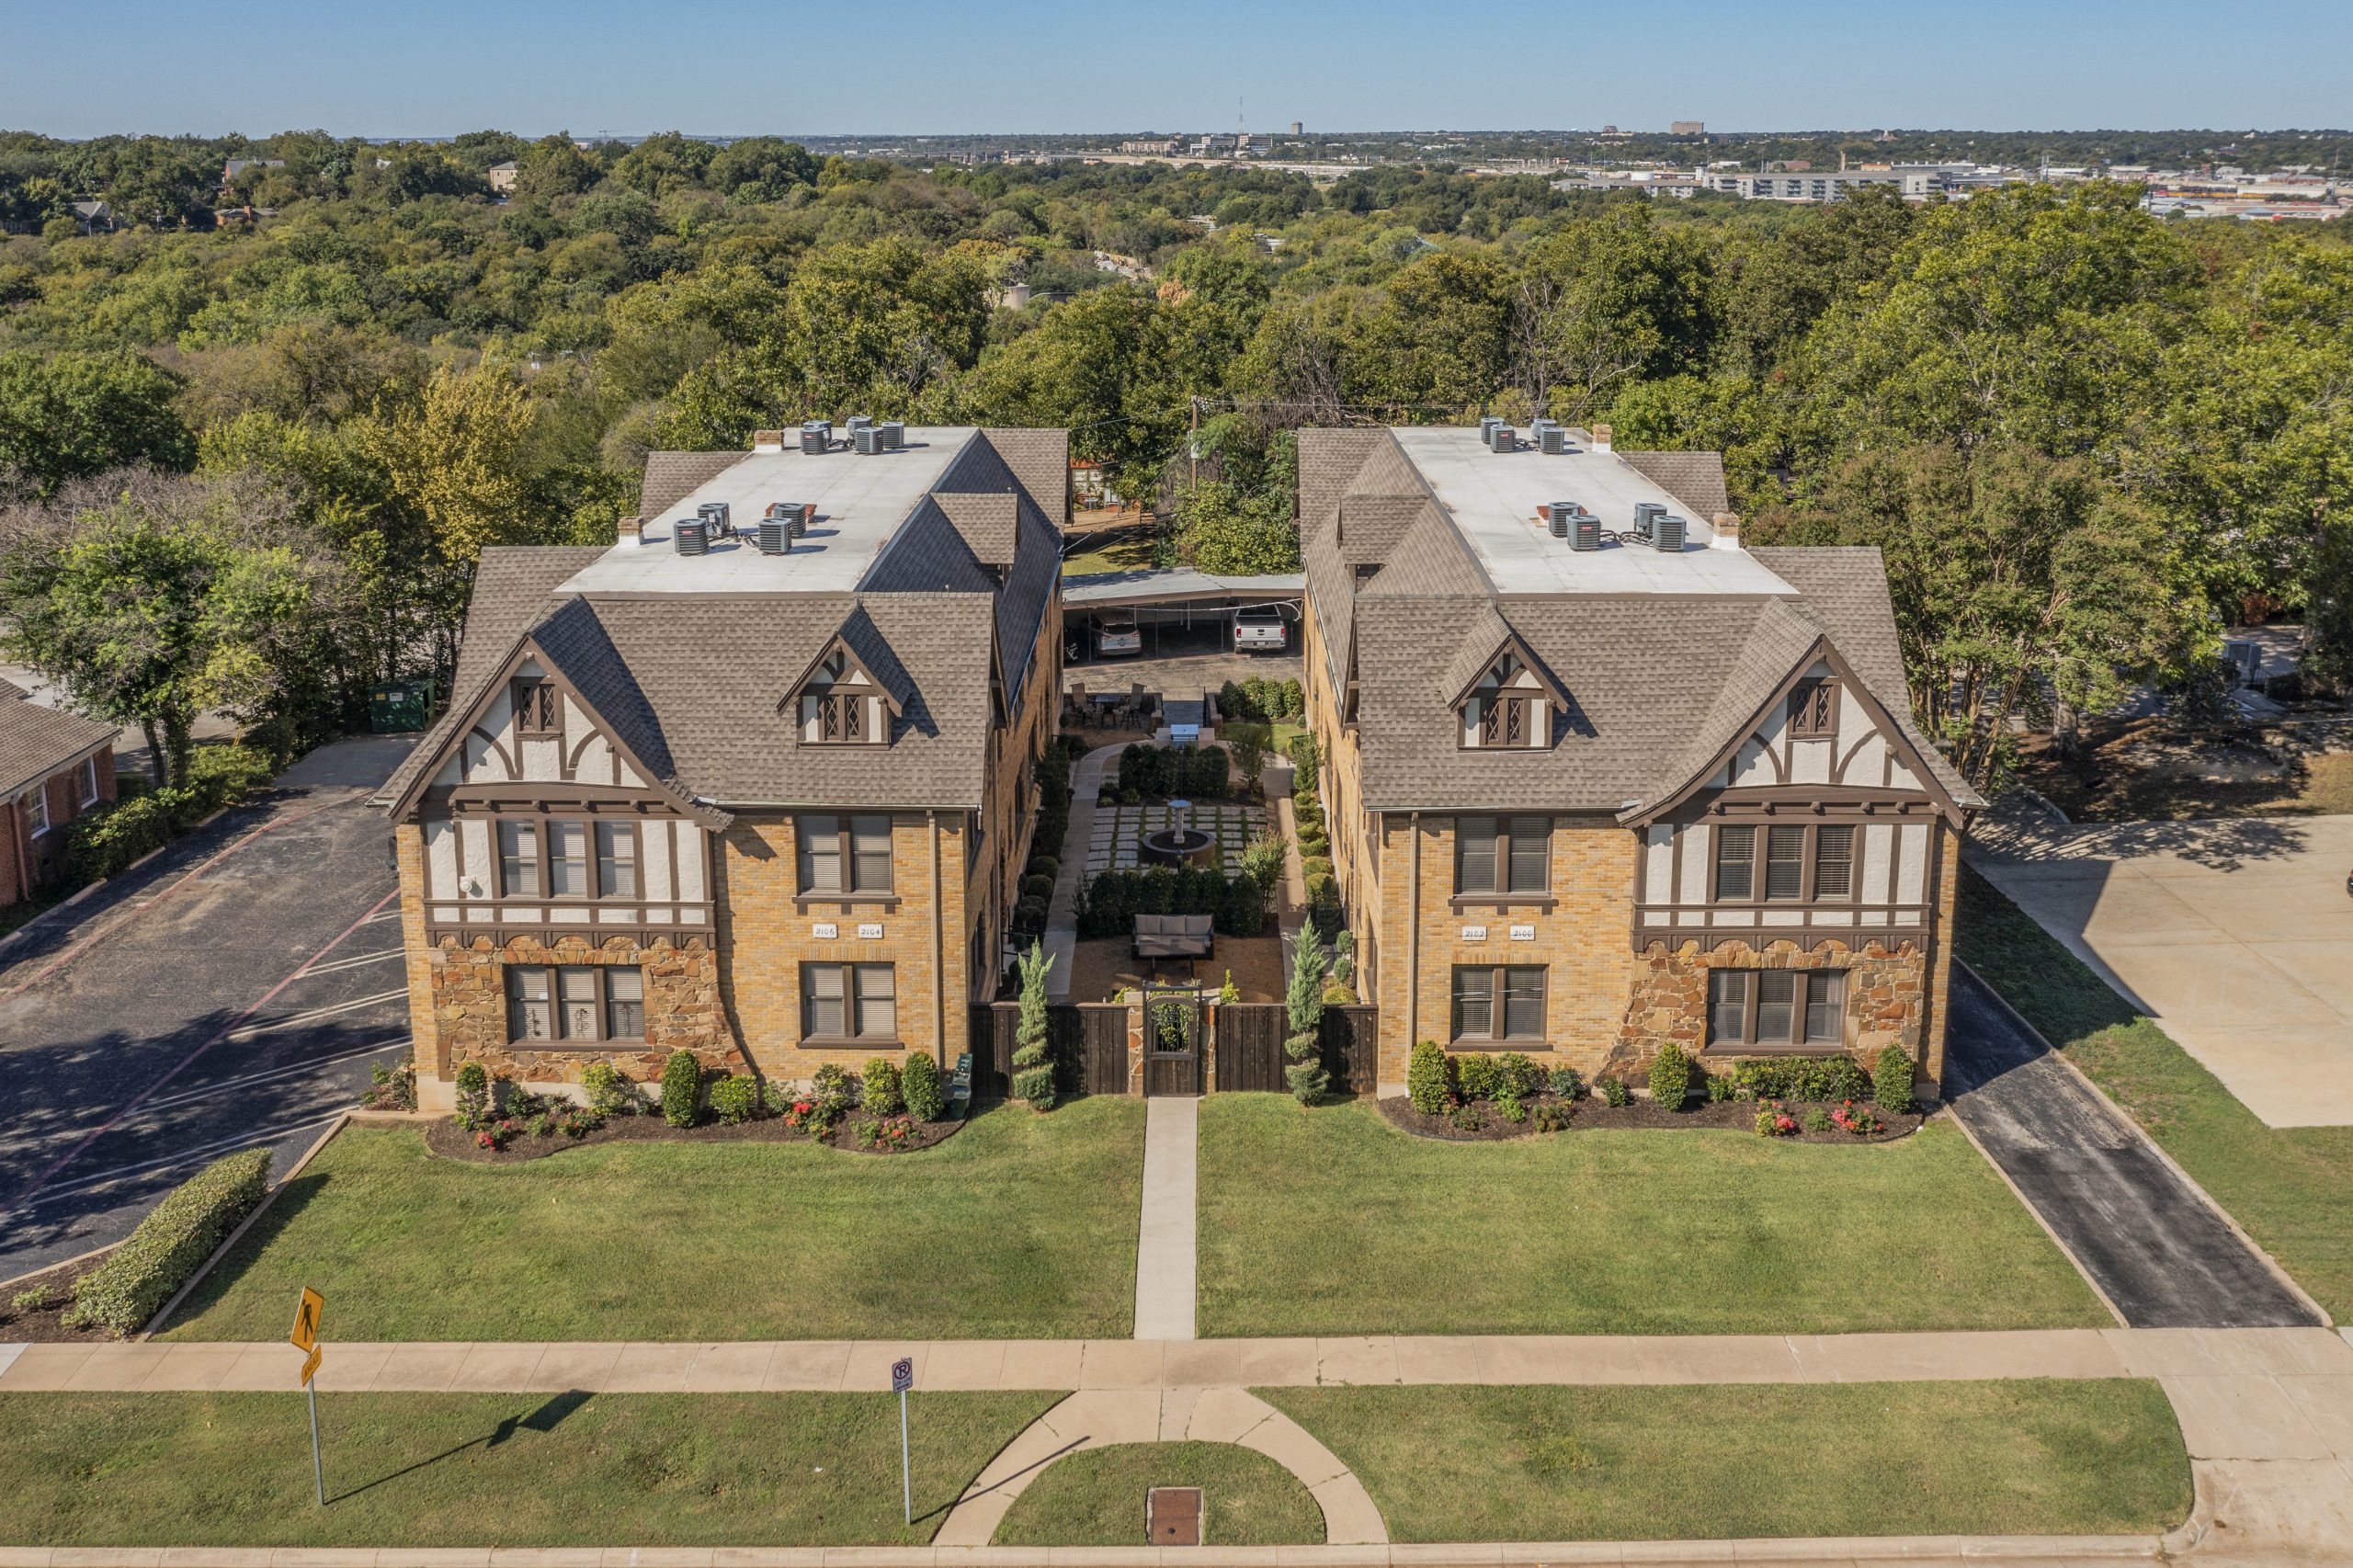 drone view of a multi-family property with a shared green space